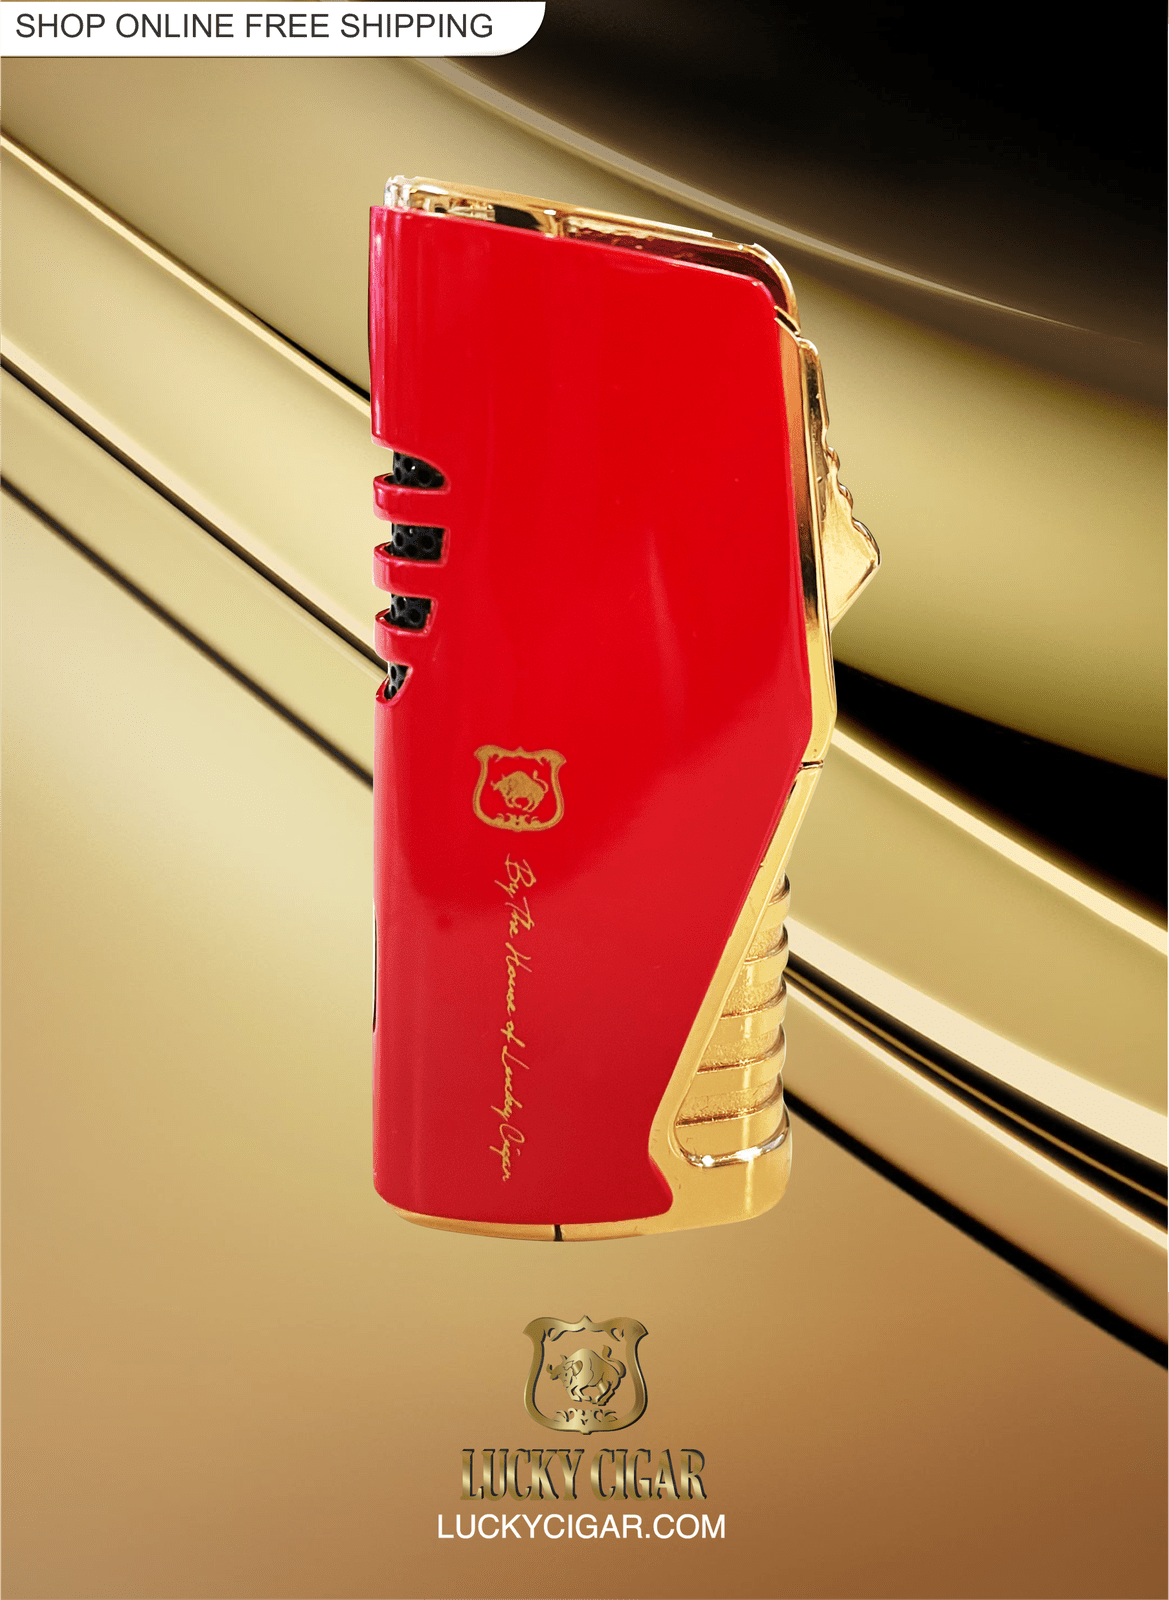 Cigar Lifestyle Accessories: Torch Lighter in Red/Gold